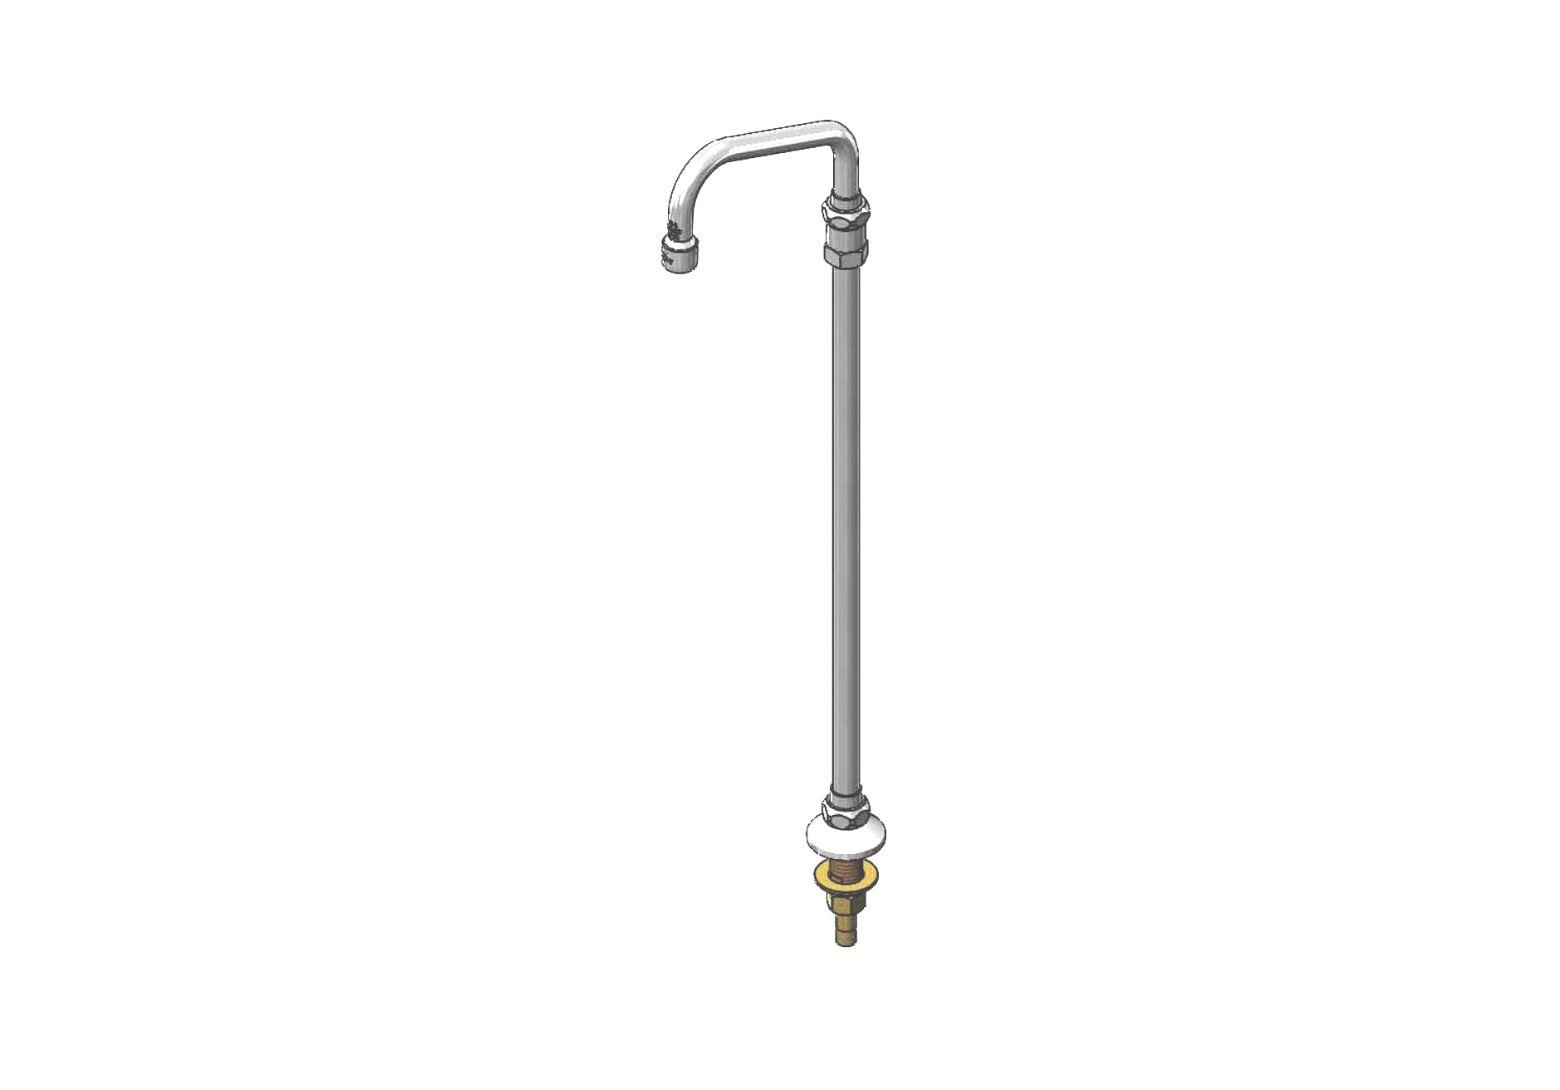 T&S Brass B-0541 Elevated 6" Swing Nozzle